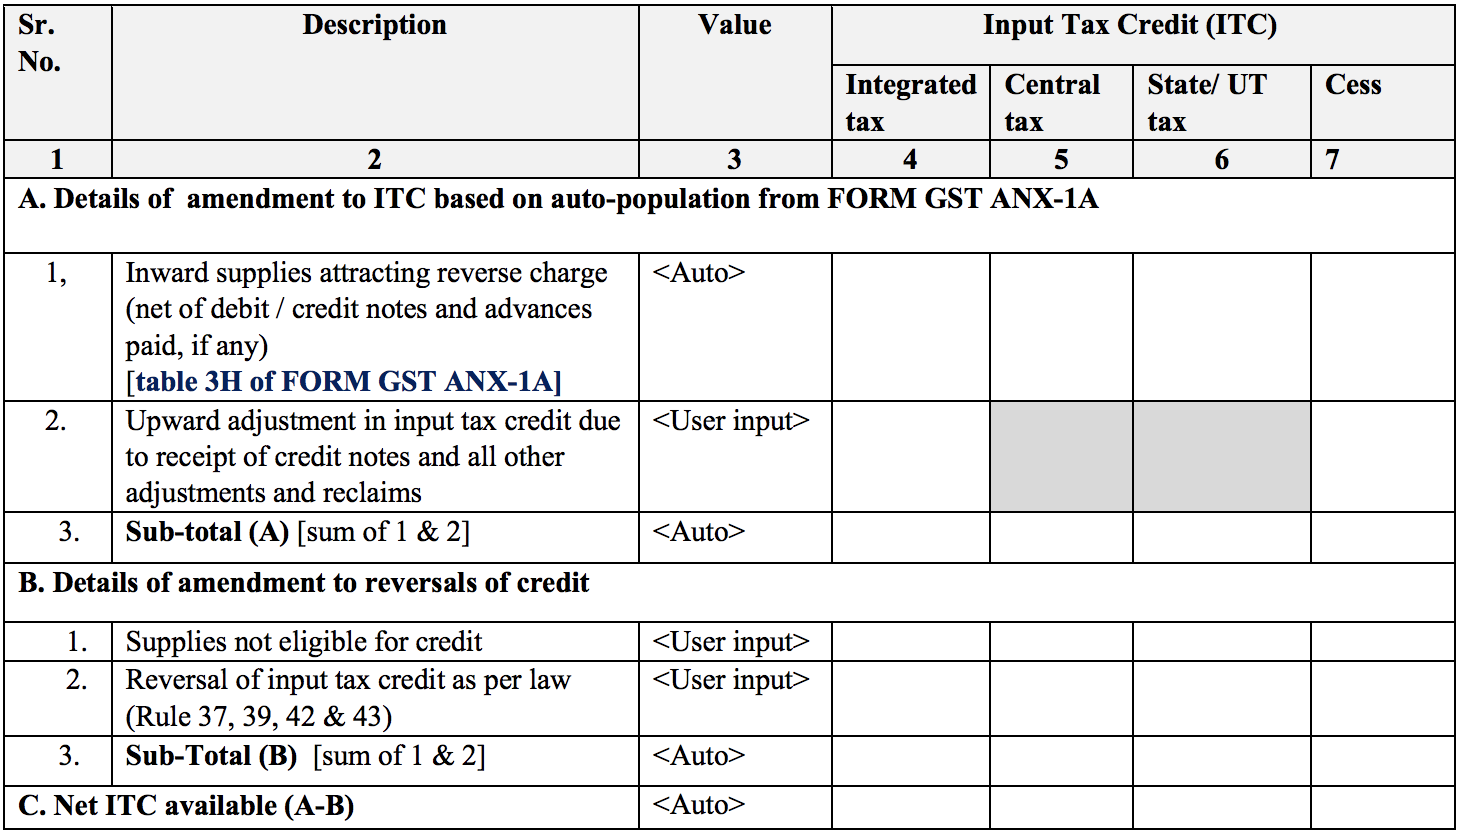 Summary of inward supplies for claiming ITC in Sugam return form GST RET-3A